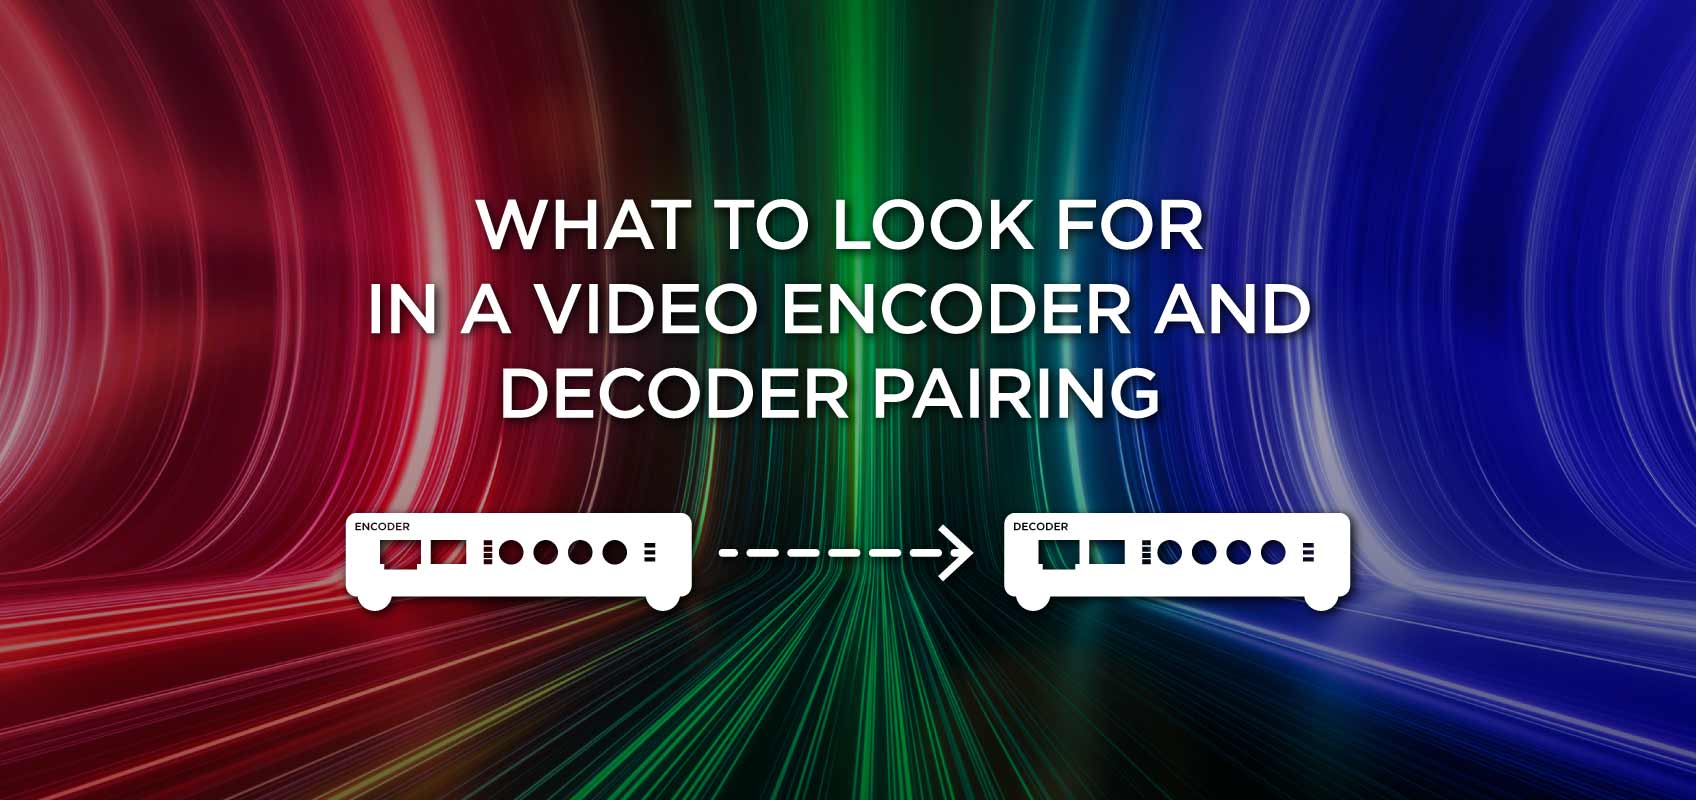 What to look for in a video encoder and decoder